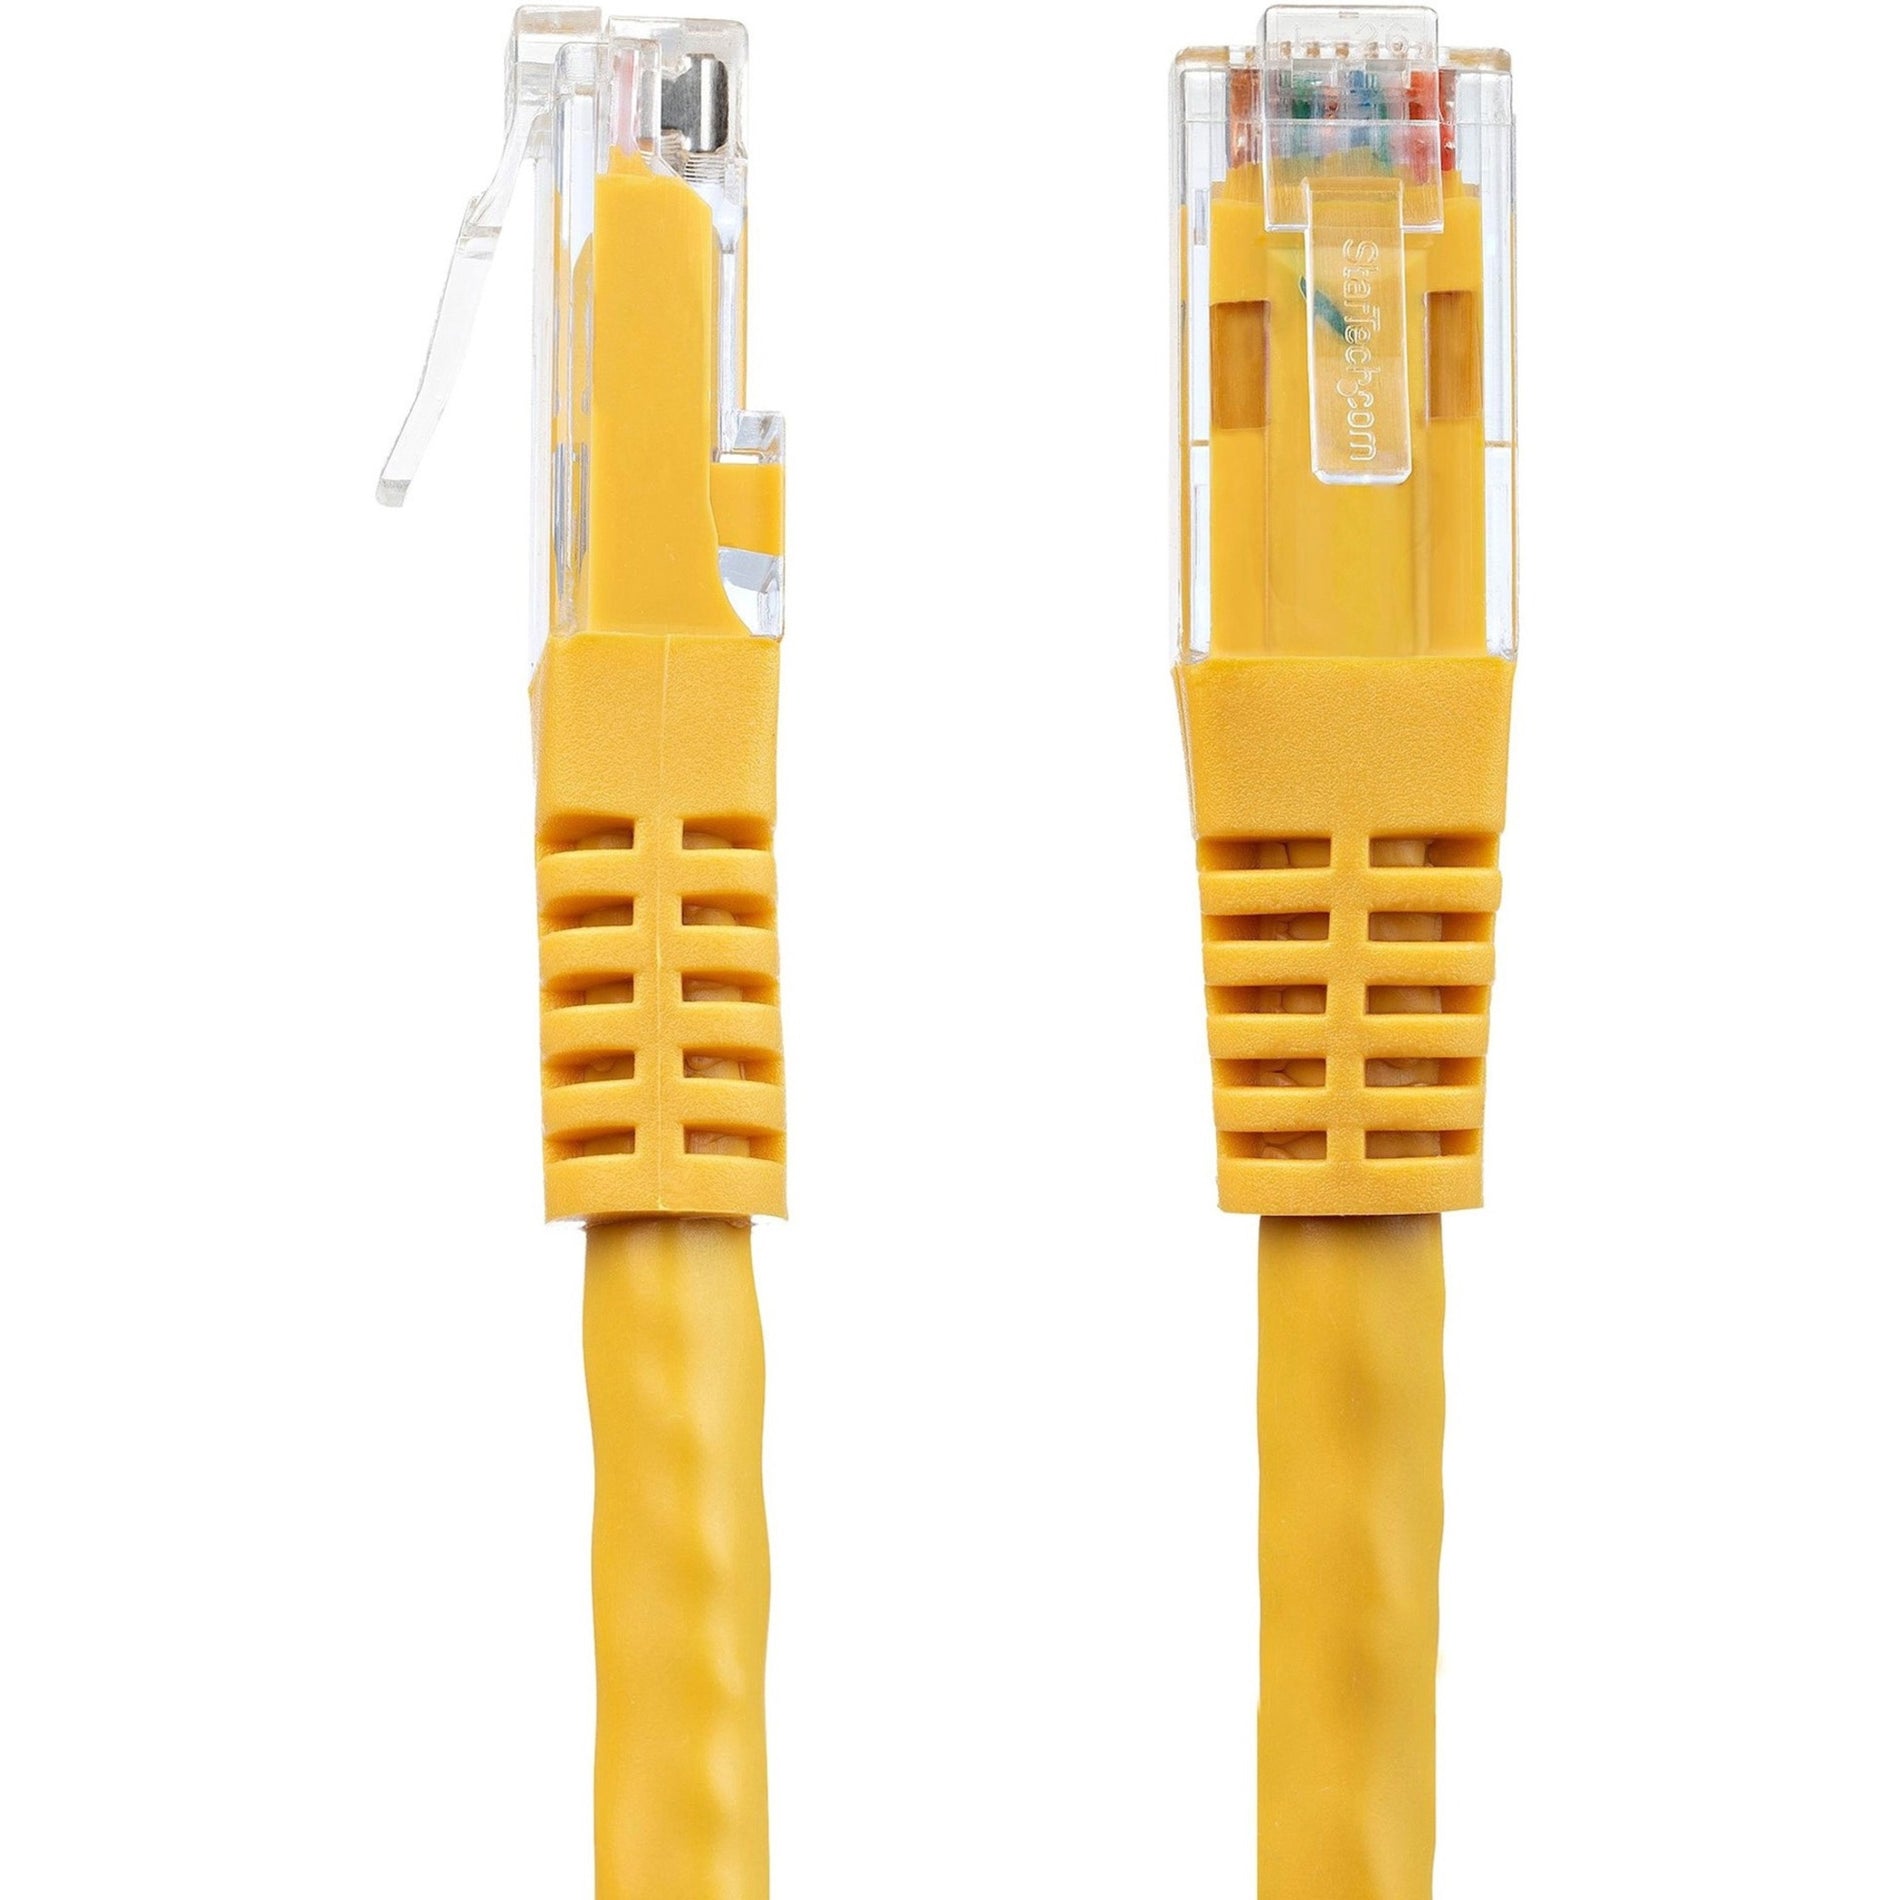 StarTech.com C6PATCH15YL 15ft Yellow Cat6 UTP Patch Cable ETL Verified, 10 Gbit/s Data Transfer Rate, Gold Plated Connectors